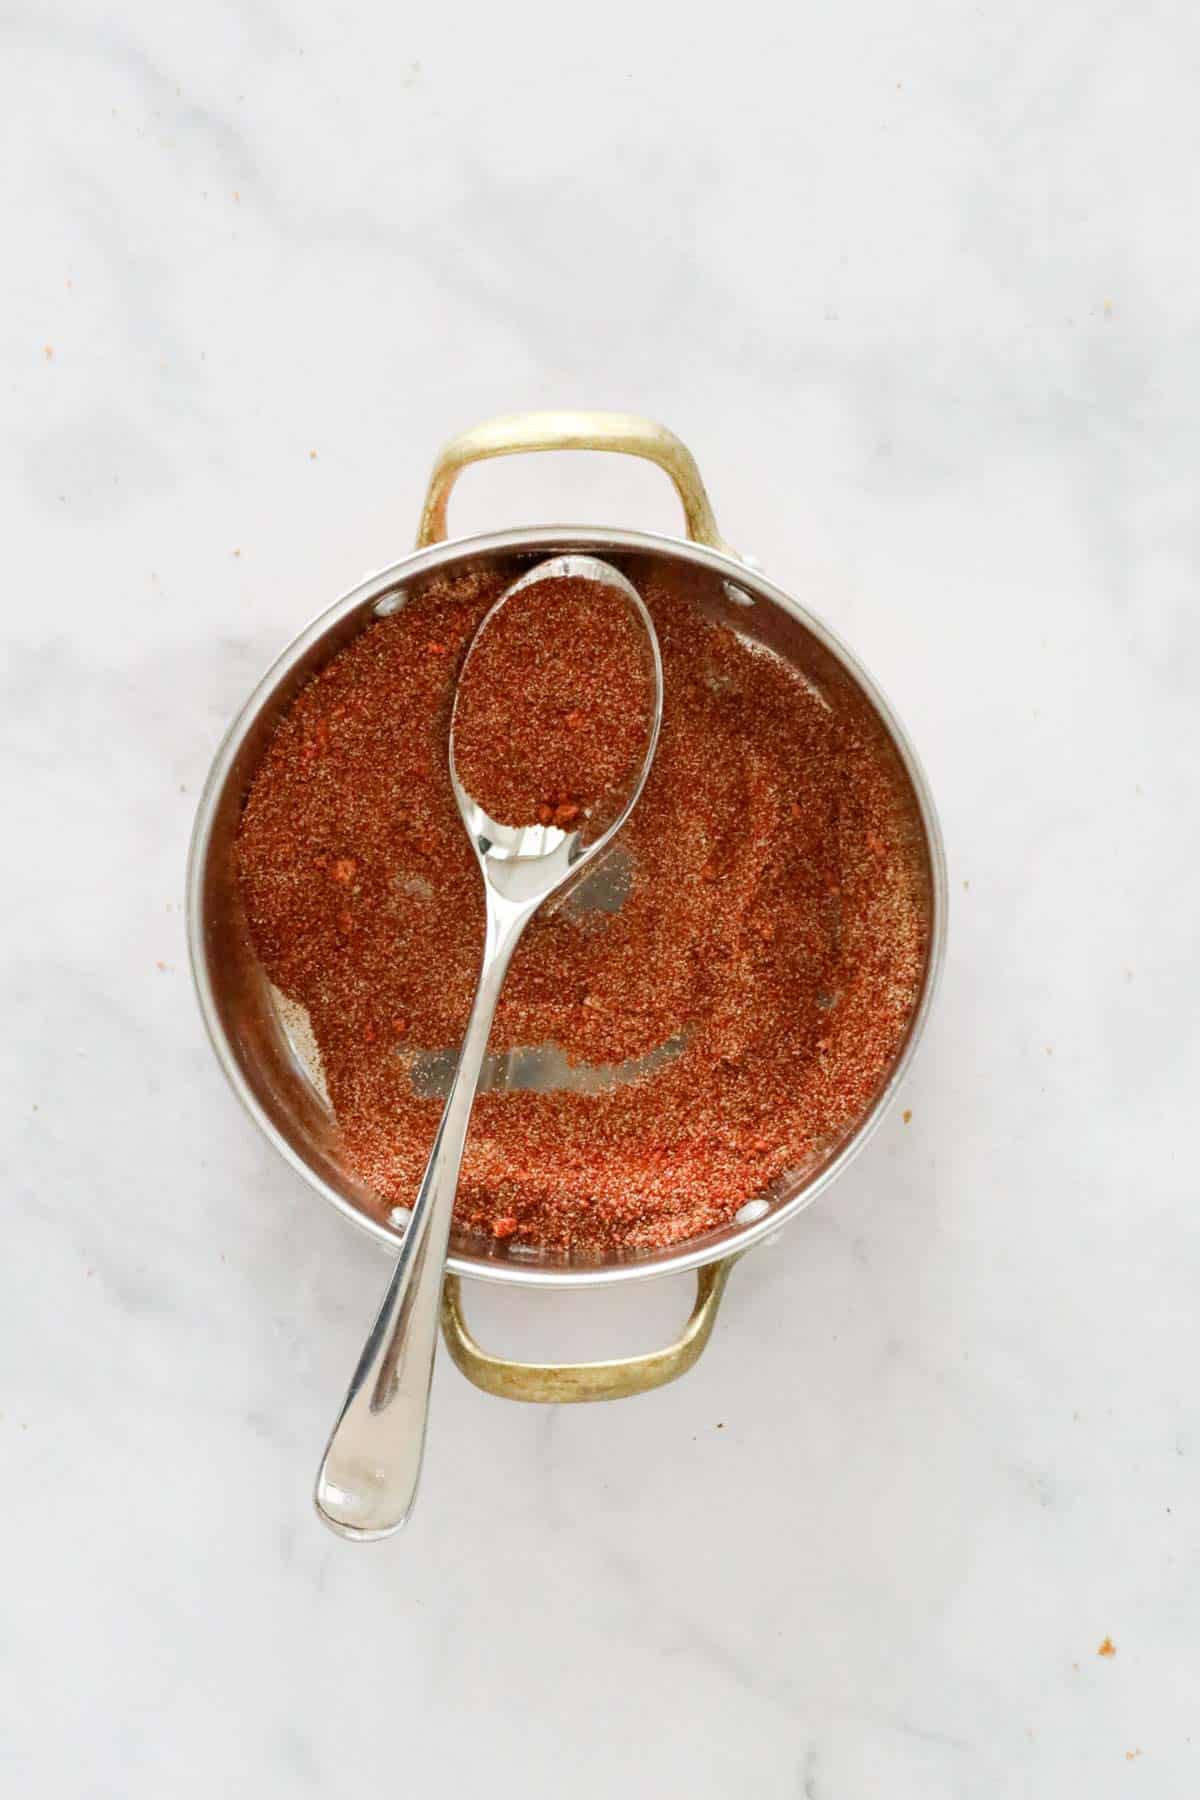 A spice mix in a bowl.